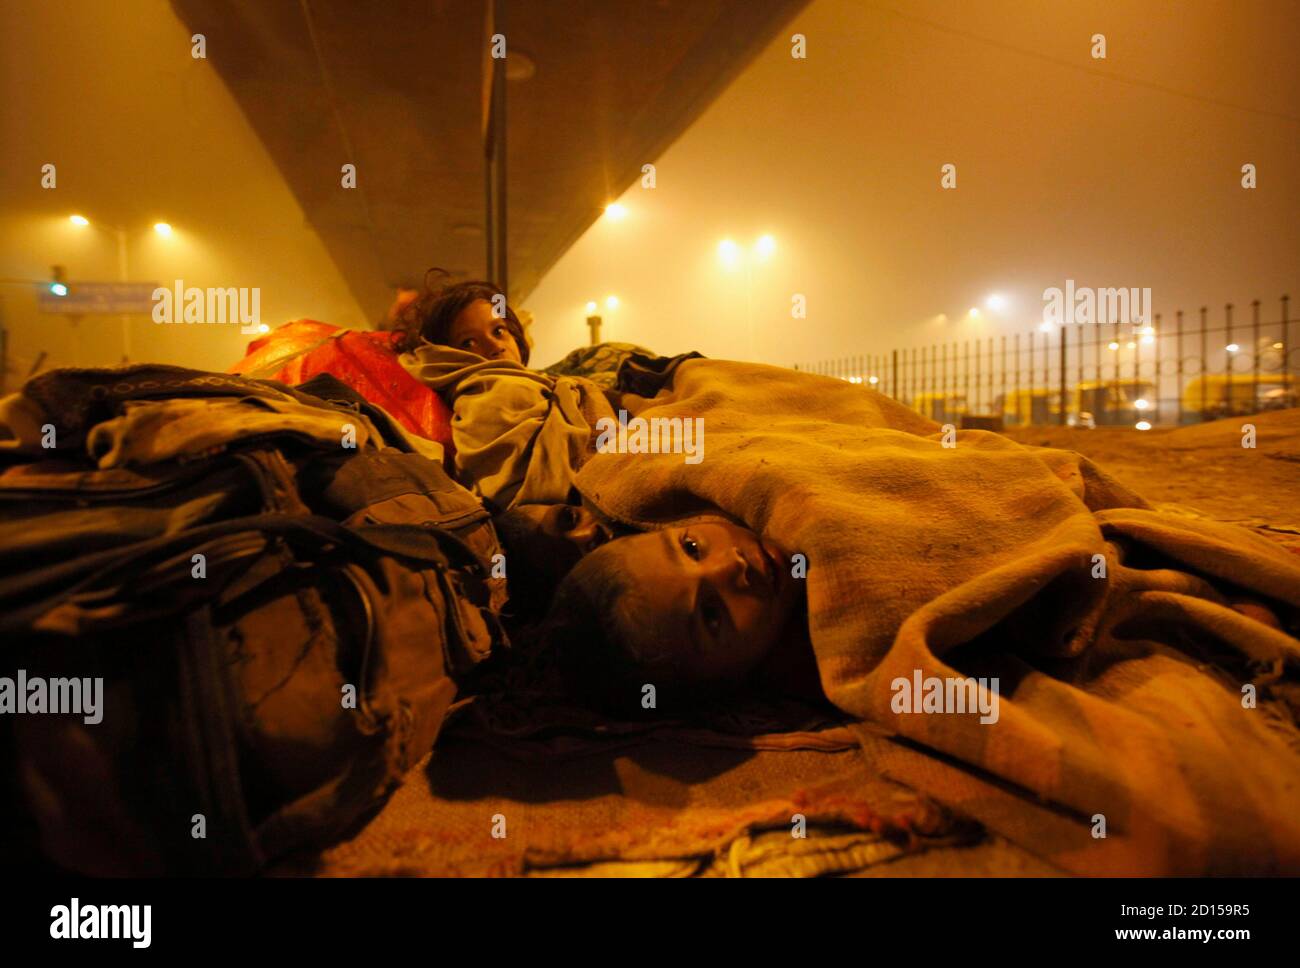 Homeless children use blankets to protect themselves from the cold under a flyover in New Delhi January 21, 2010. The Supreme Court chided the Delhi government to provide night shelters with blankets, water and mobile toilets to all homeless in the capital, local media reported. REUTERS/Reinhard Krause (INDIA - Tags: SOCIETY IMAGES OF THE DAY) Stock Photo